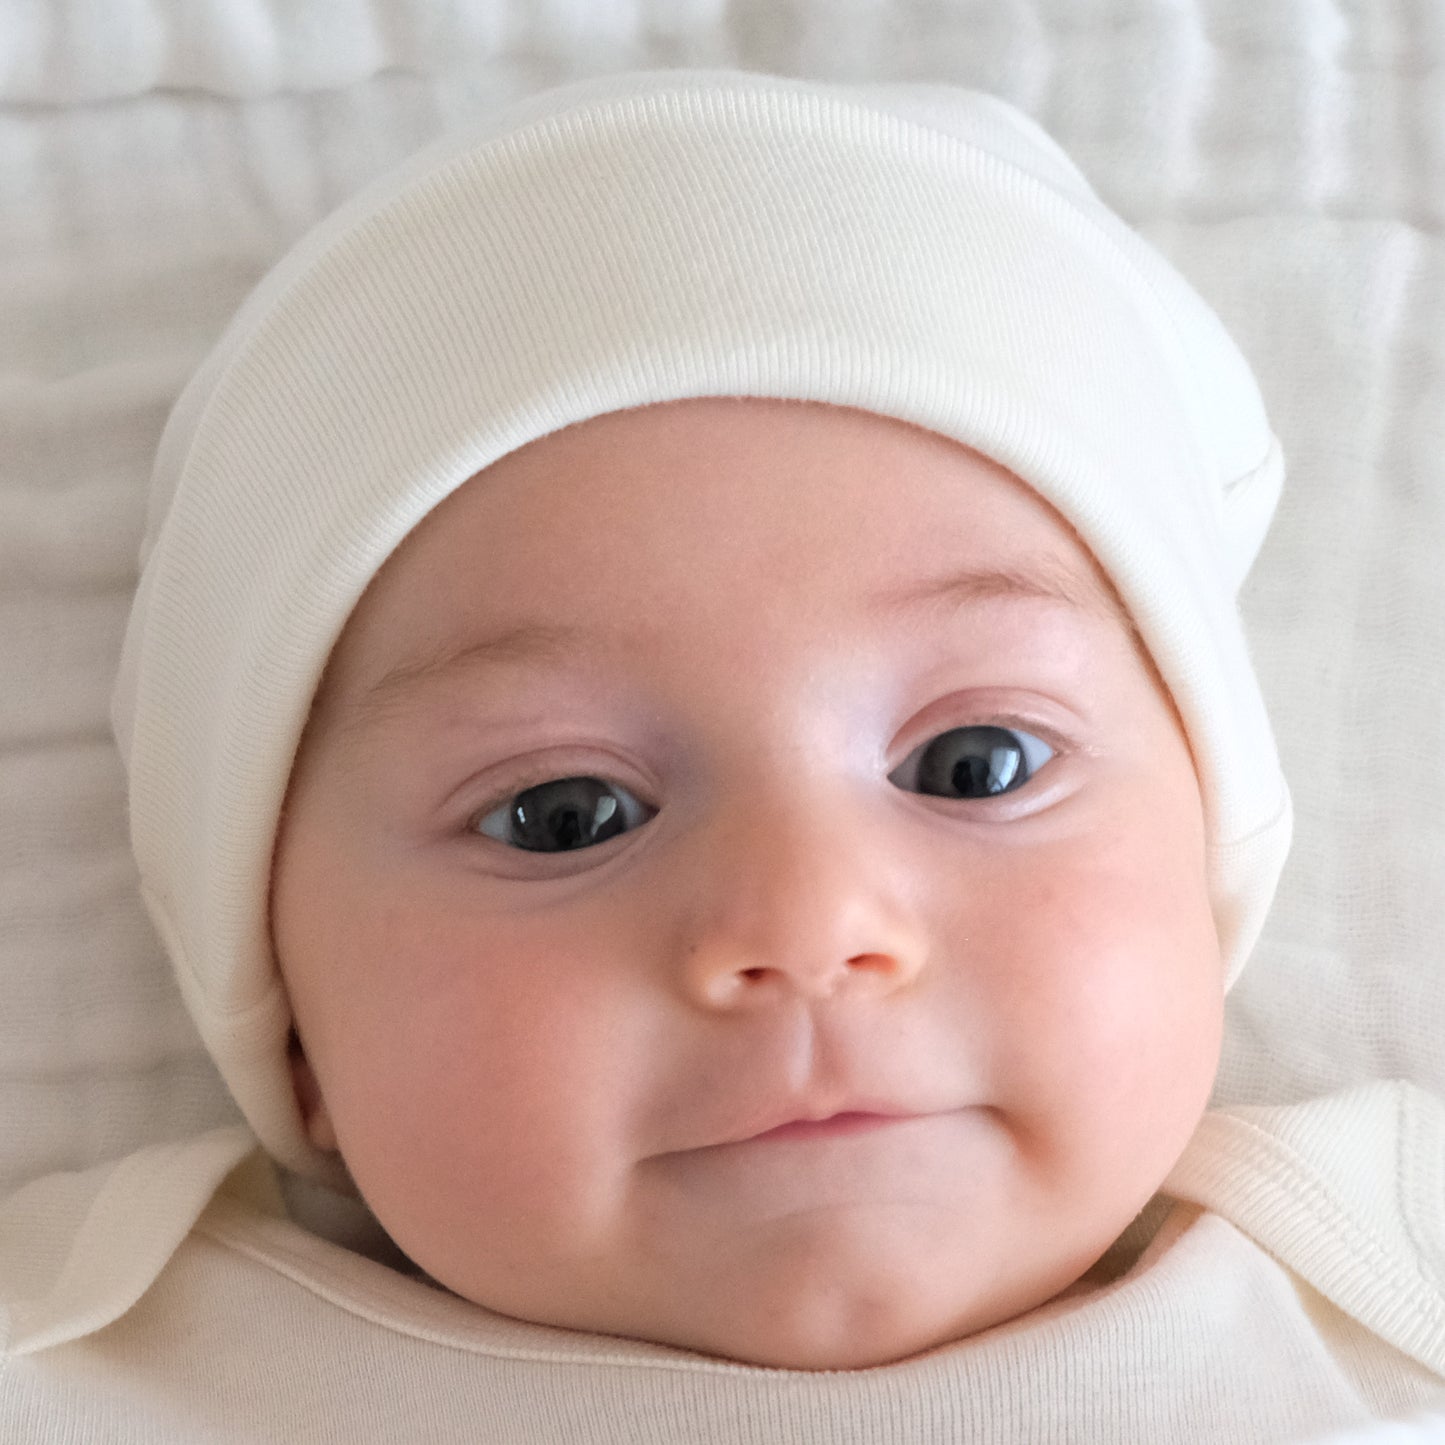 fibre-for-good-natural-beanie-organic-cotton-baby-clothes-baby-shower-gift-australia